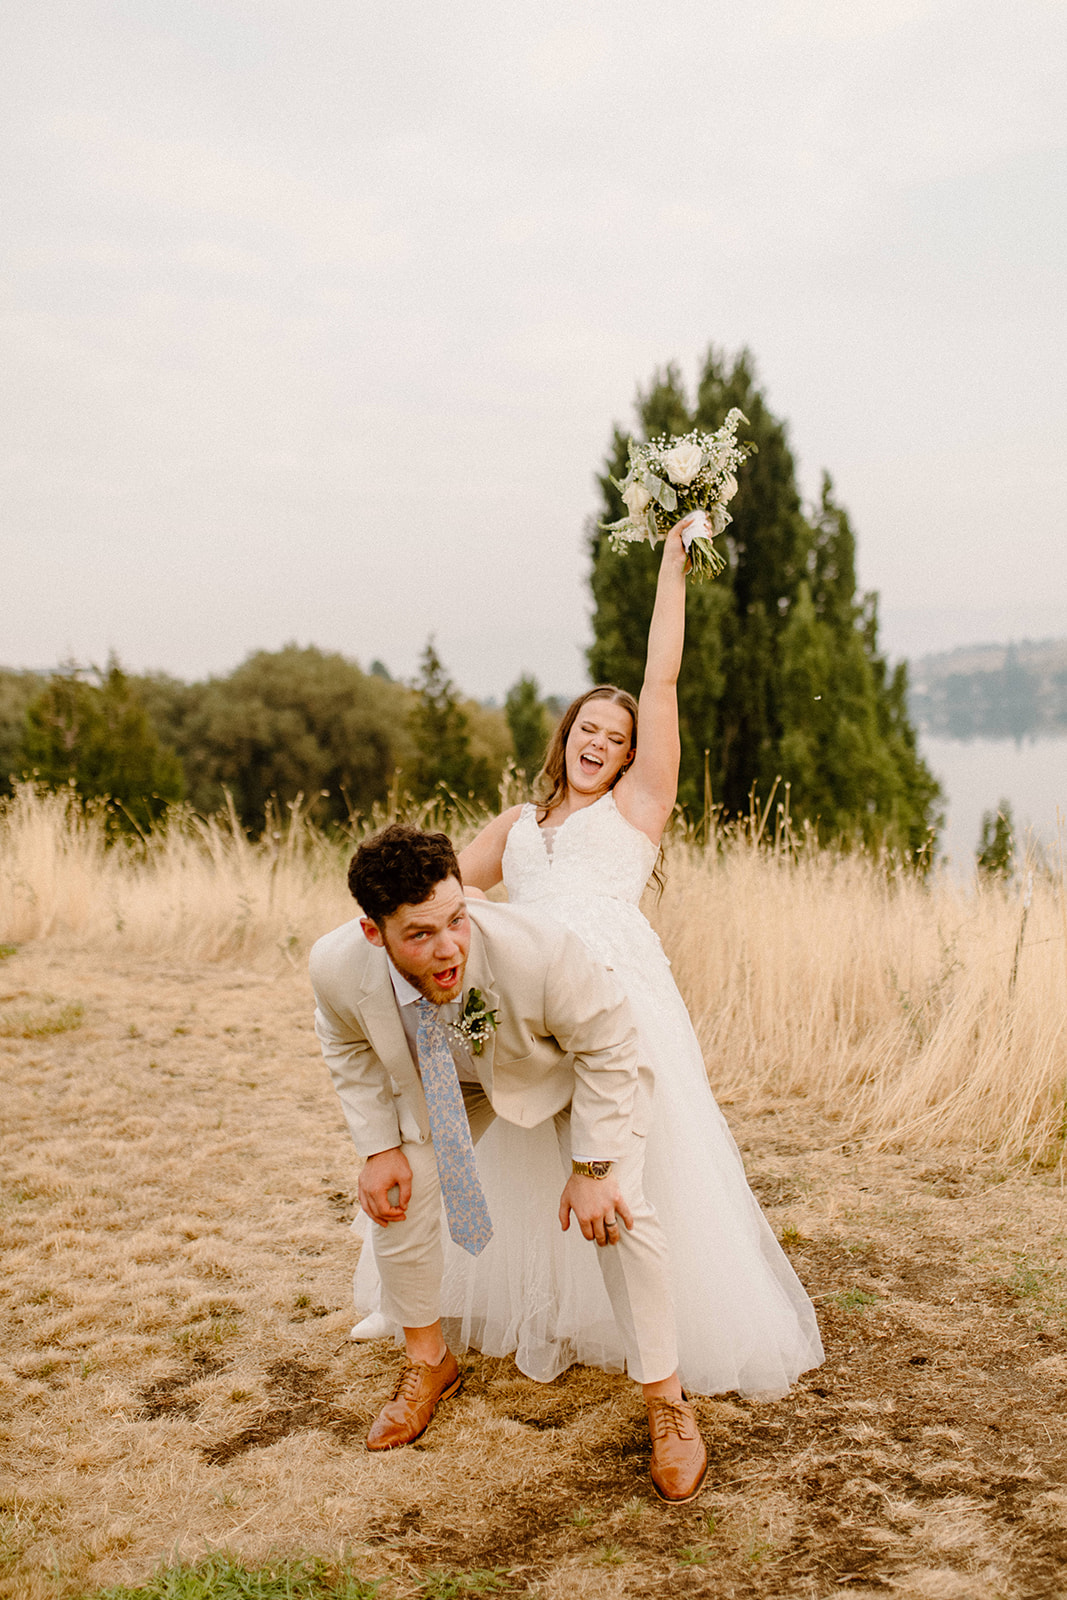 Beautiful Bride and Groom dancing in grass fields